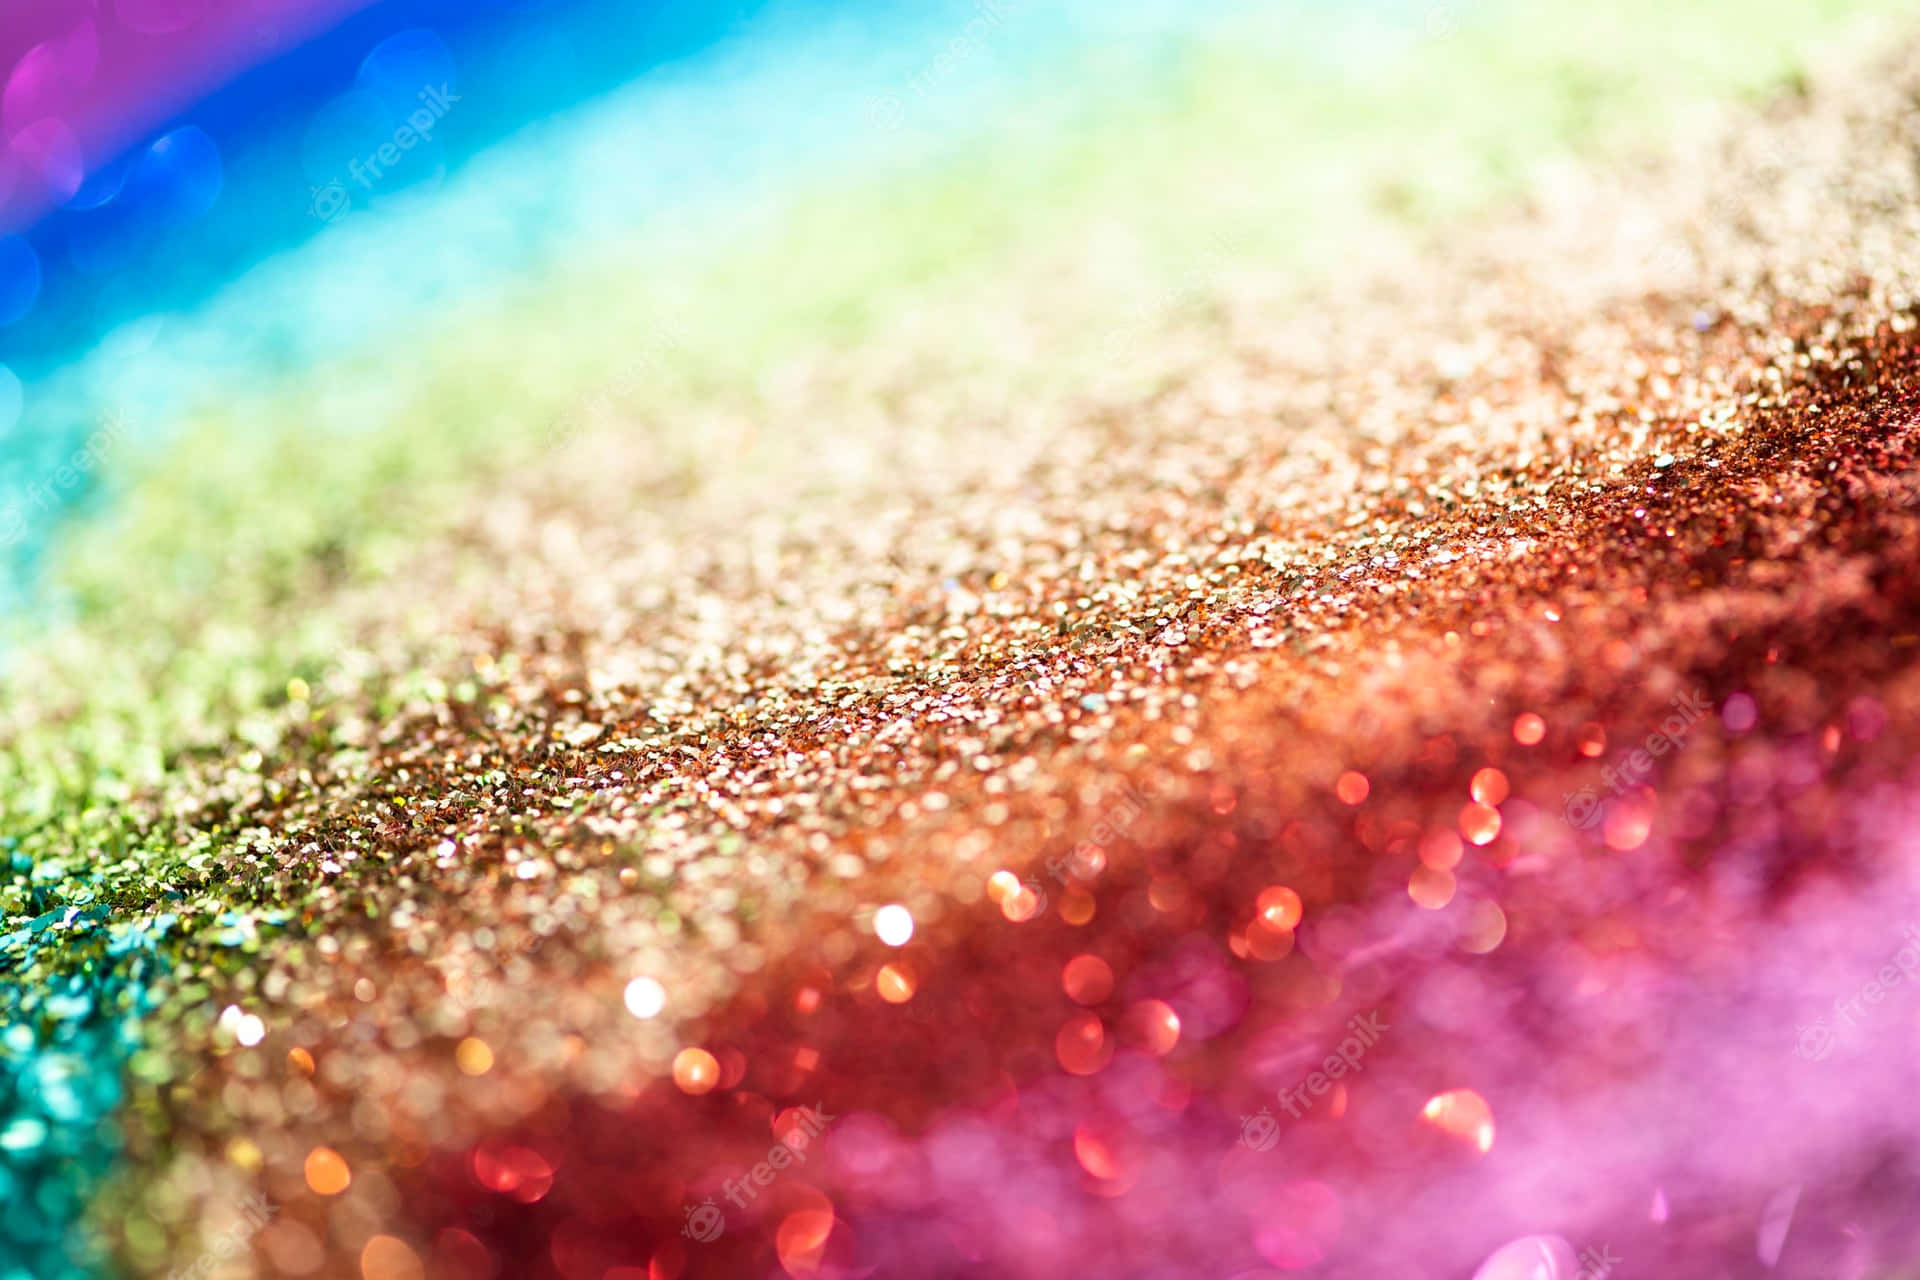 sparkly wallpaper